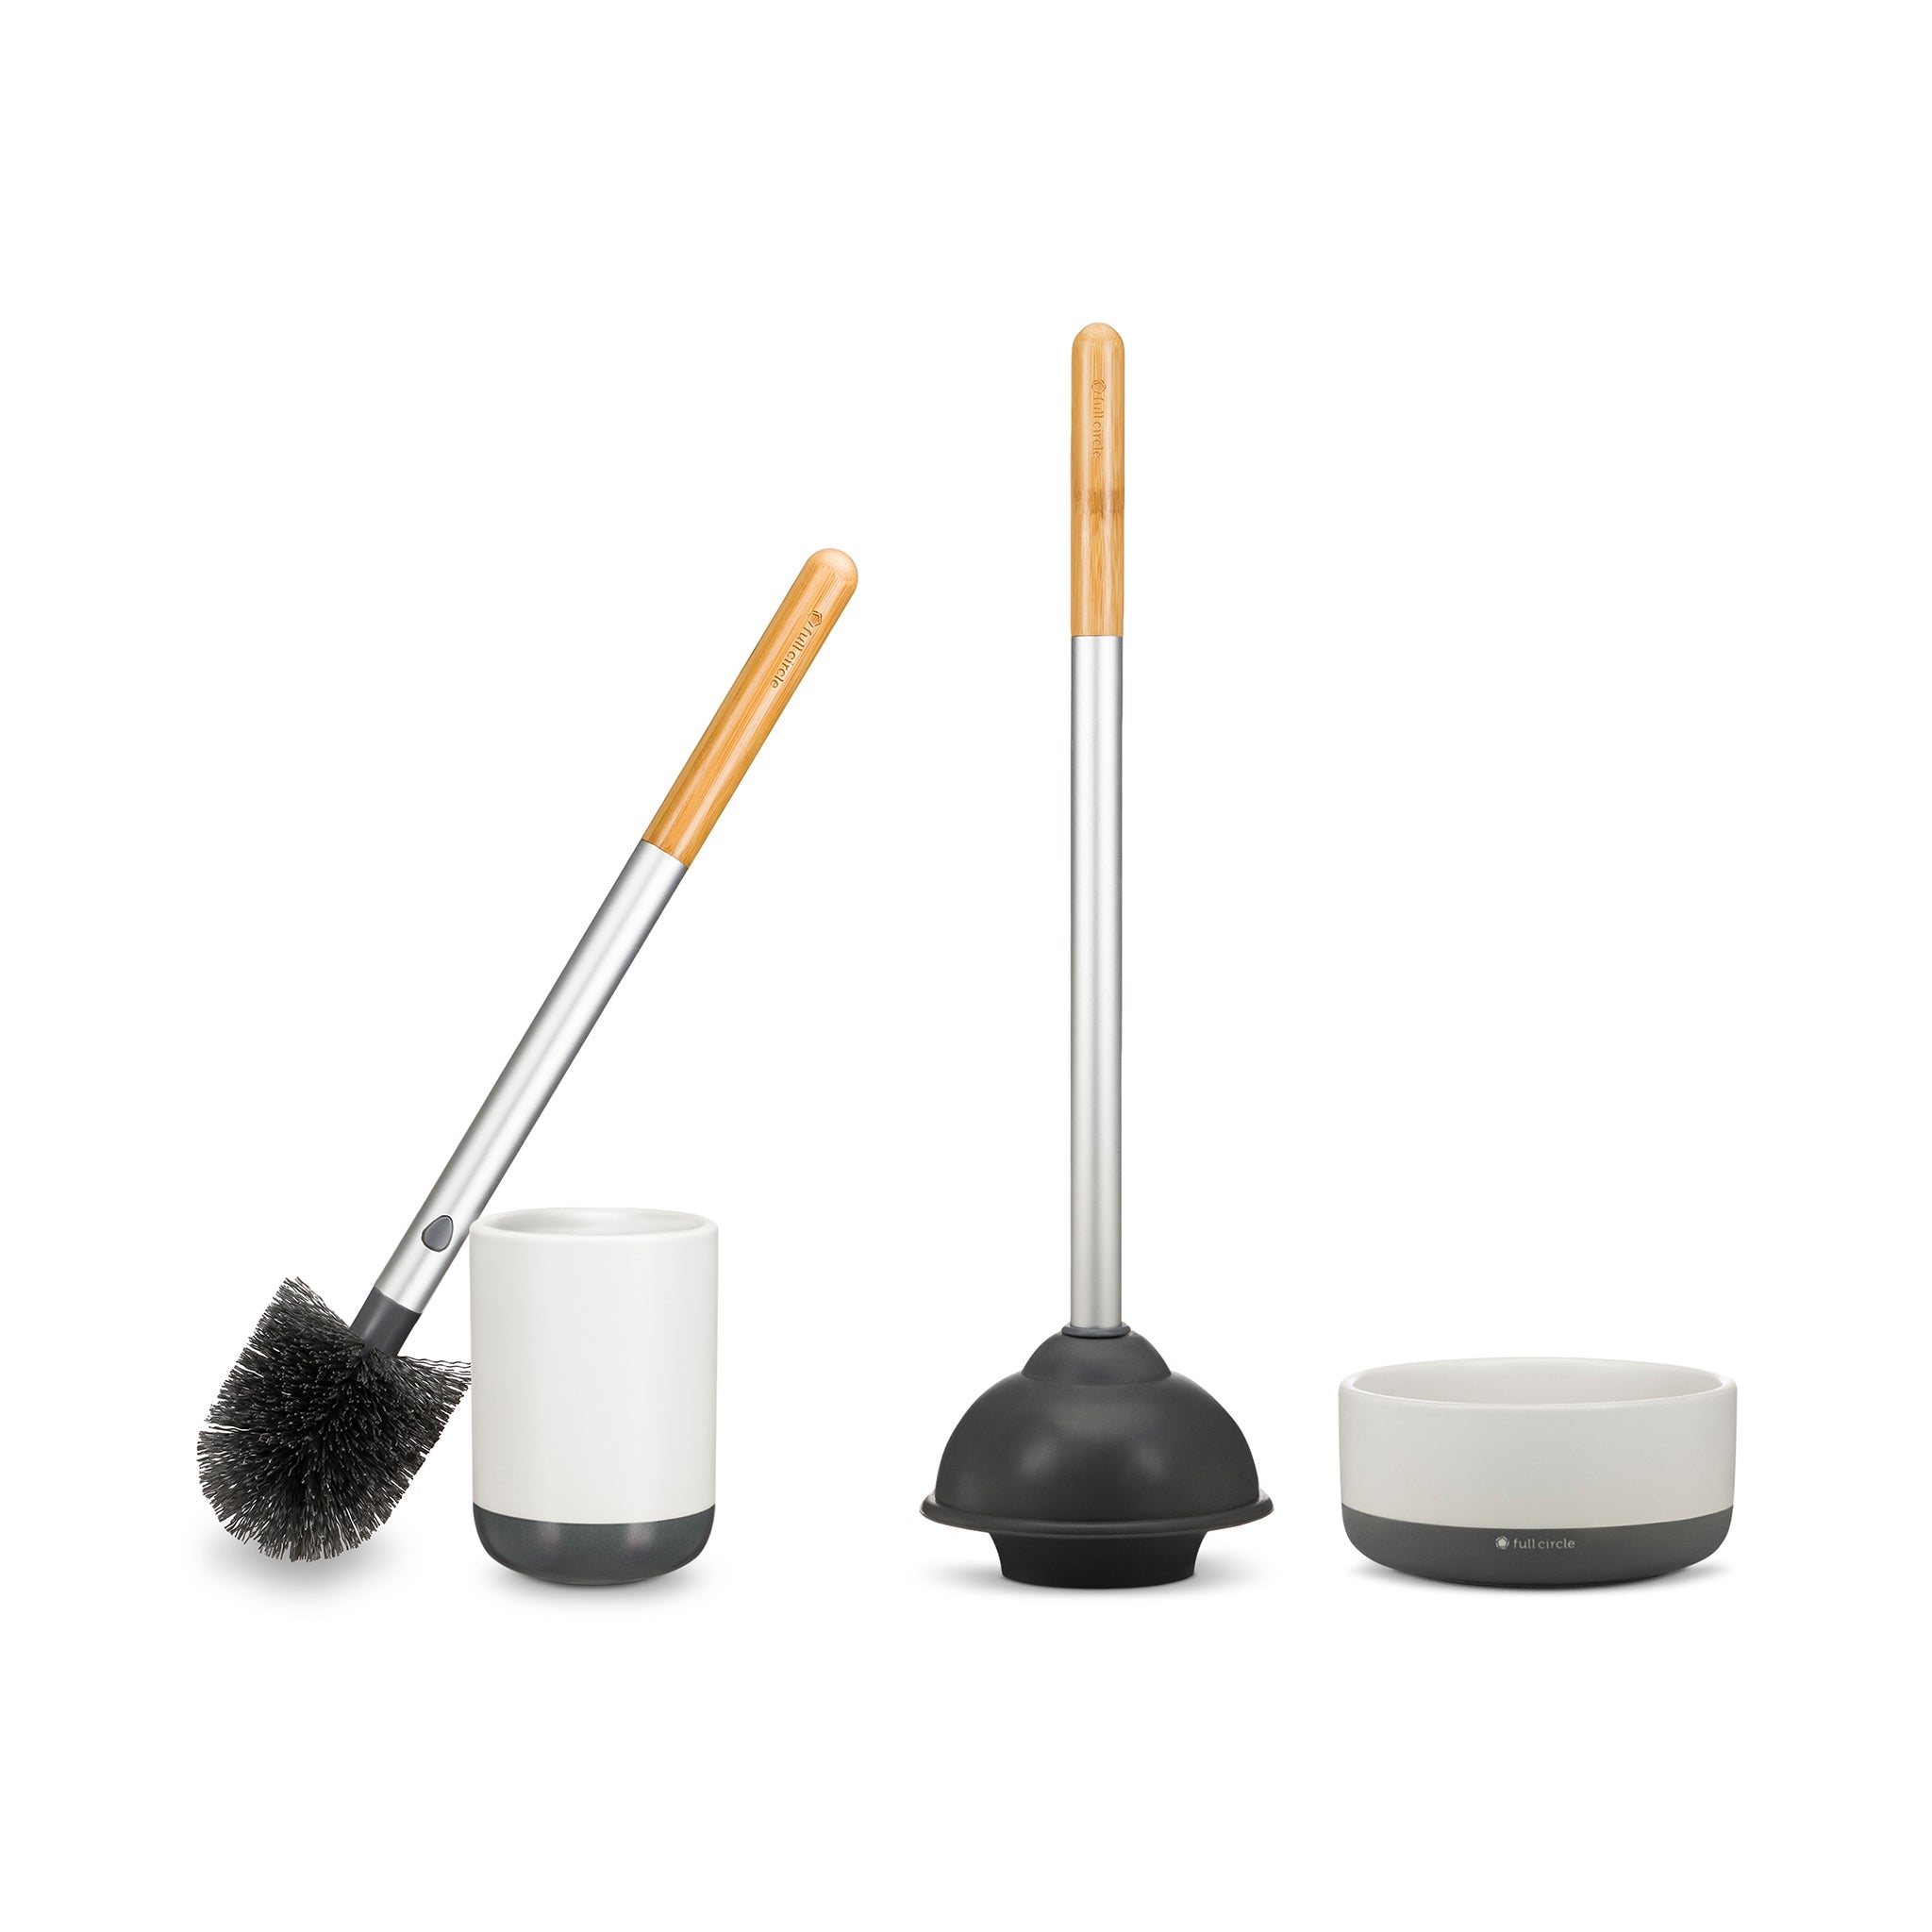 Toilet Brush and Plunger Set